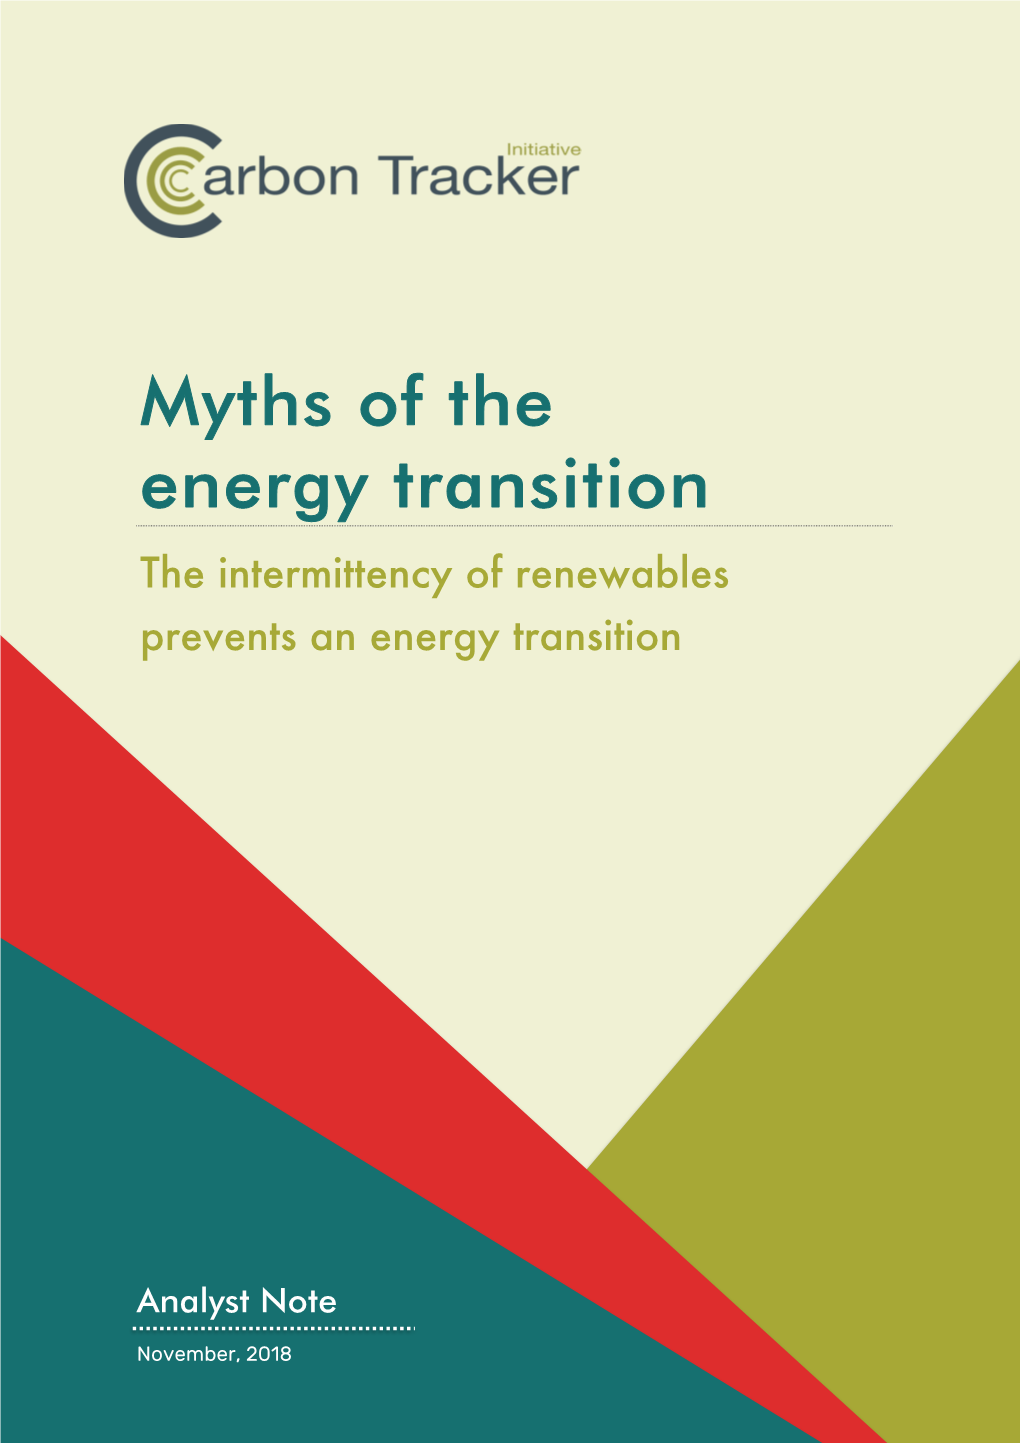 Myths of the Energy Transition: Renewables Are Too Small to Matter’1, This Tends to Happen When Challenging Technologies Are Still Small but Fast Growing